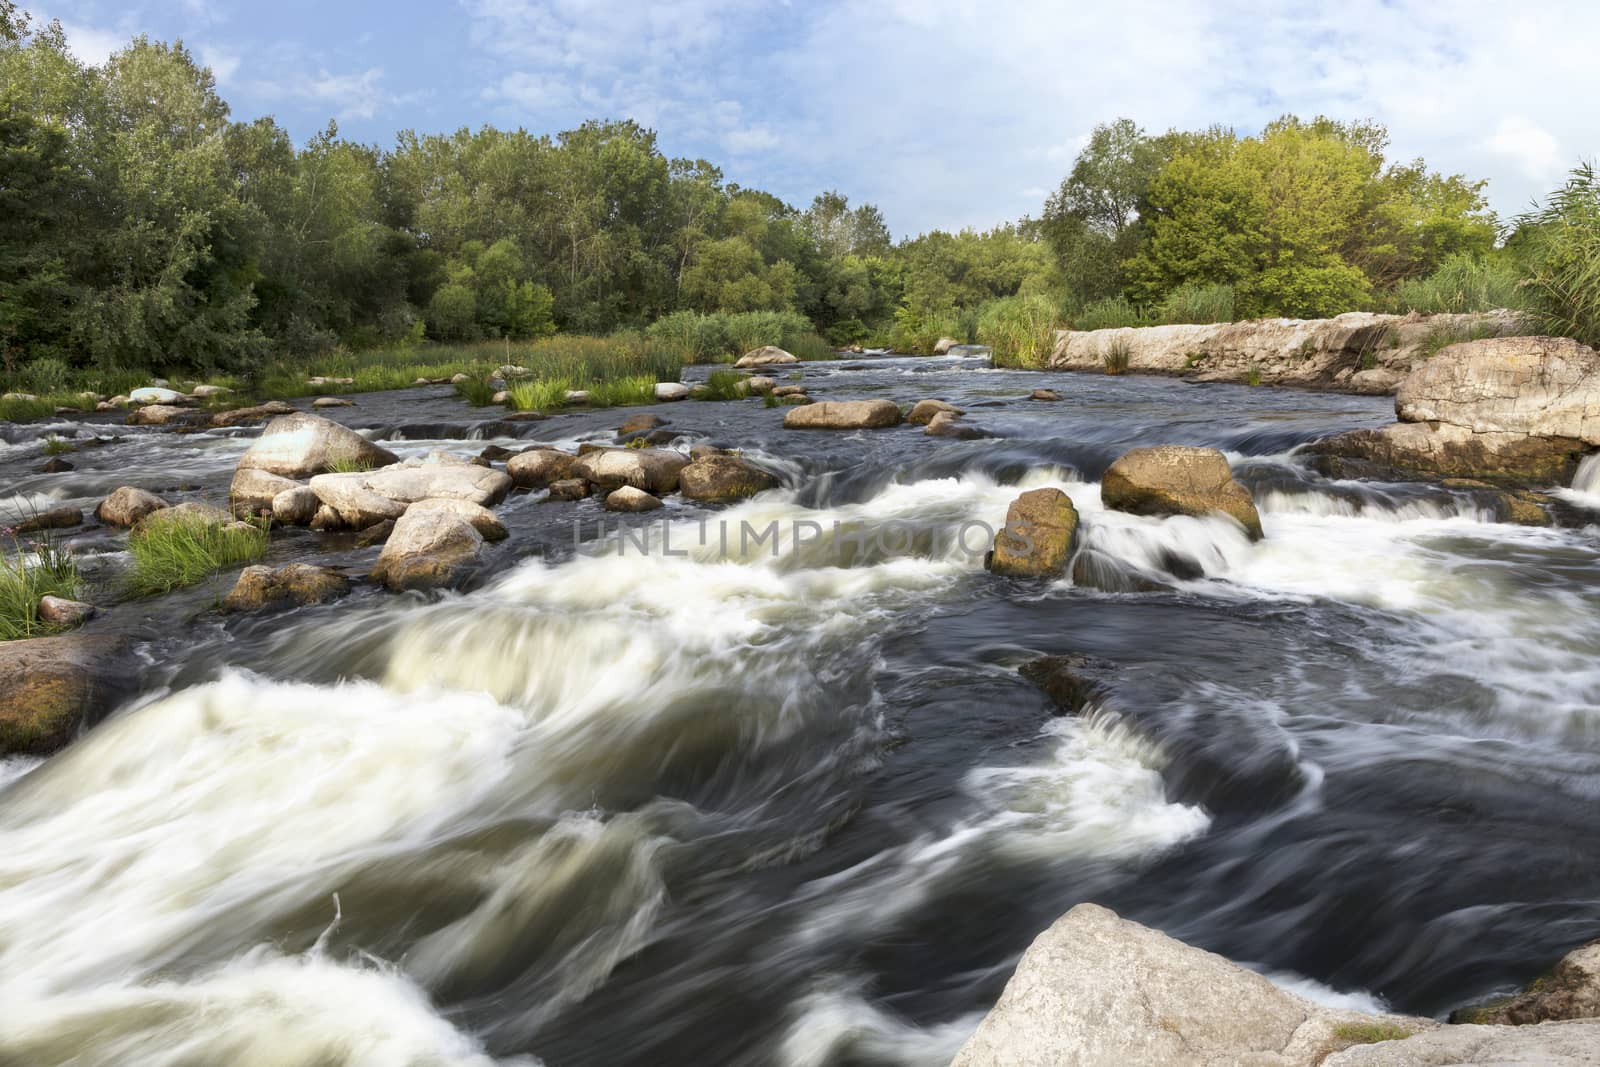 The rapid flow of the river, rocky coasts, rapids, bright green vegetation and a cloudy blue summer sky by Sergii